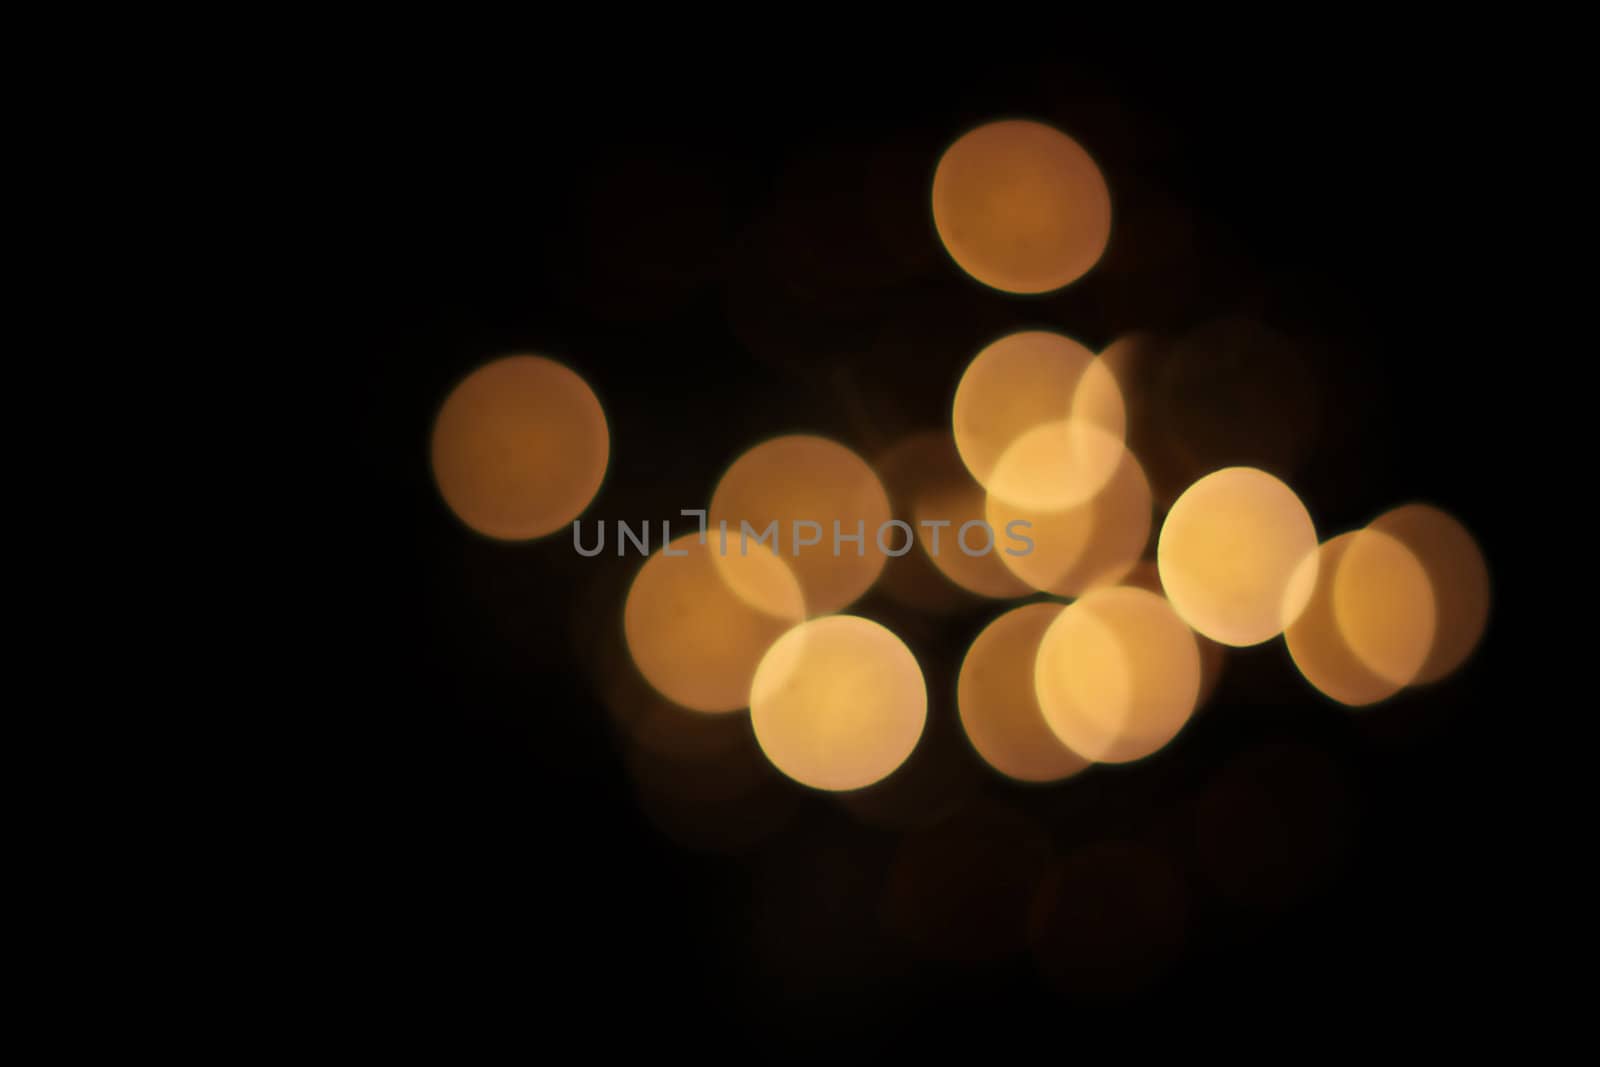 Lights shot purposefully out of focus. Could yse as a lens flare. Great use for a holiday or festive background!